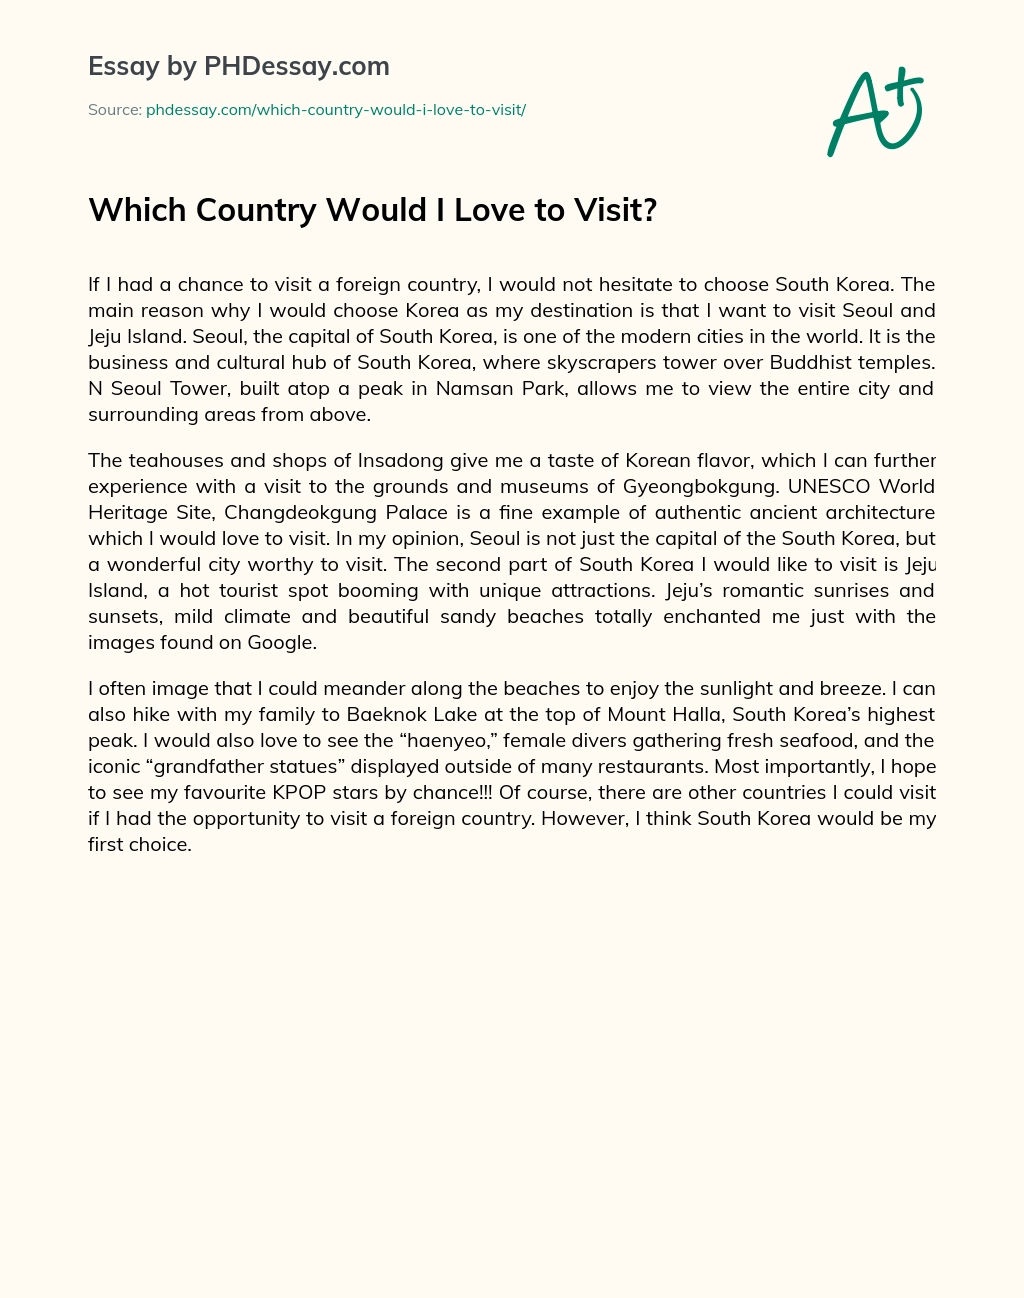 Which Country Would I Love to Visit? essay